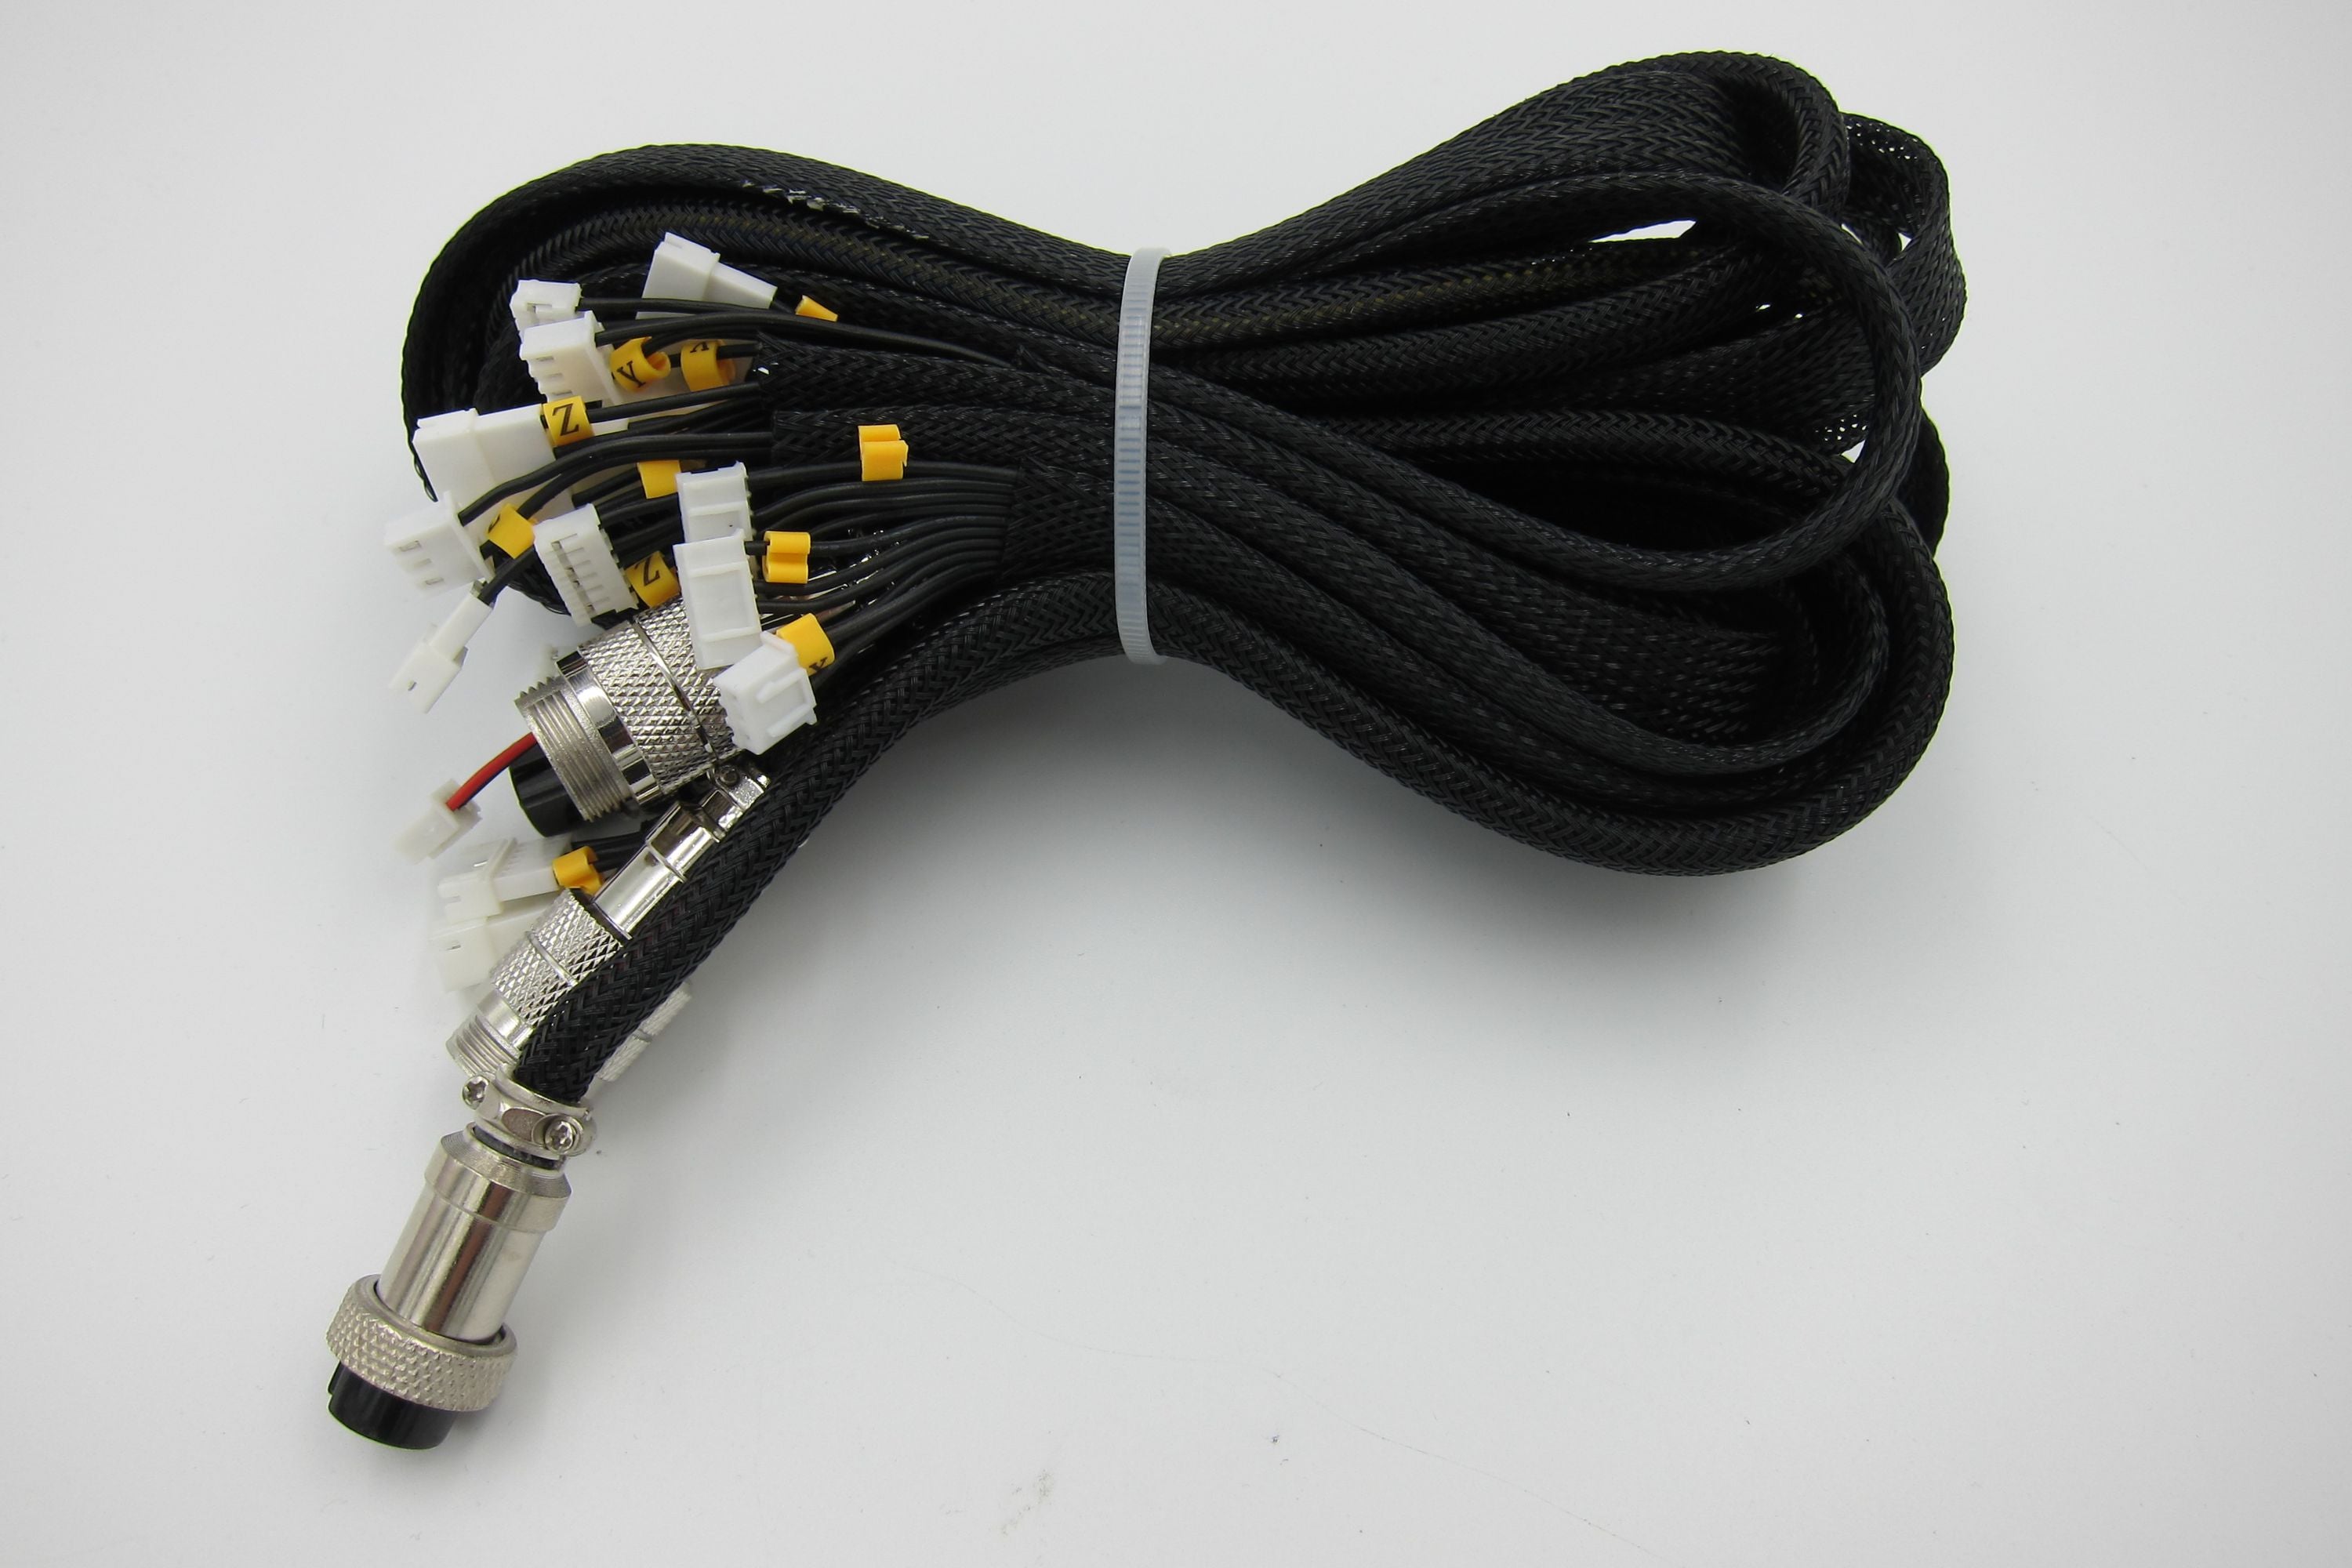 Creality 3D Cable Extension kit for CR-10 series